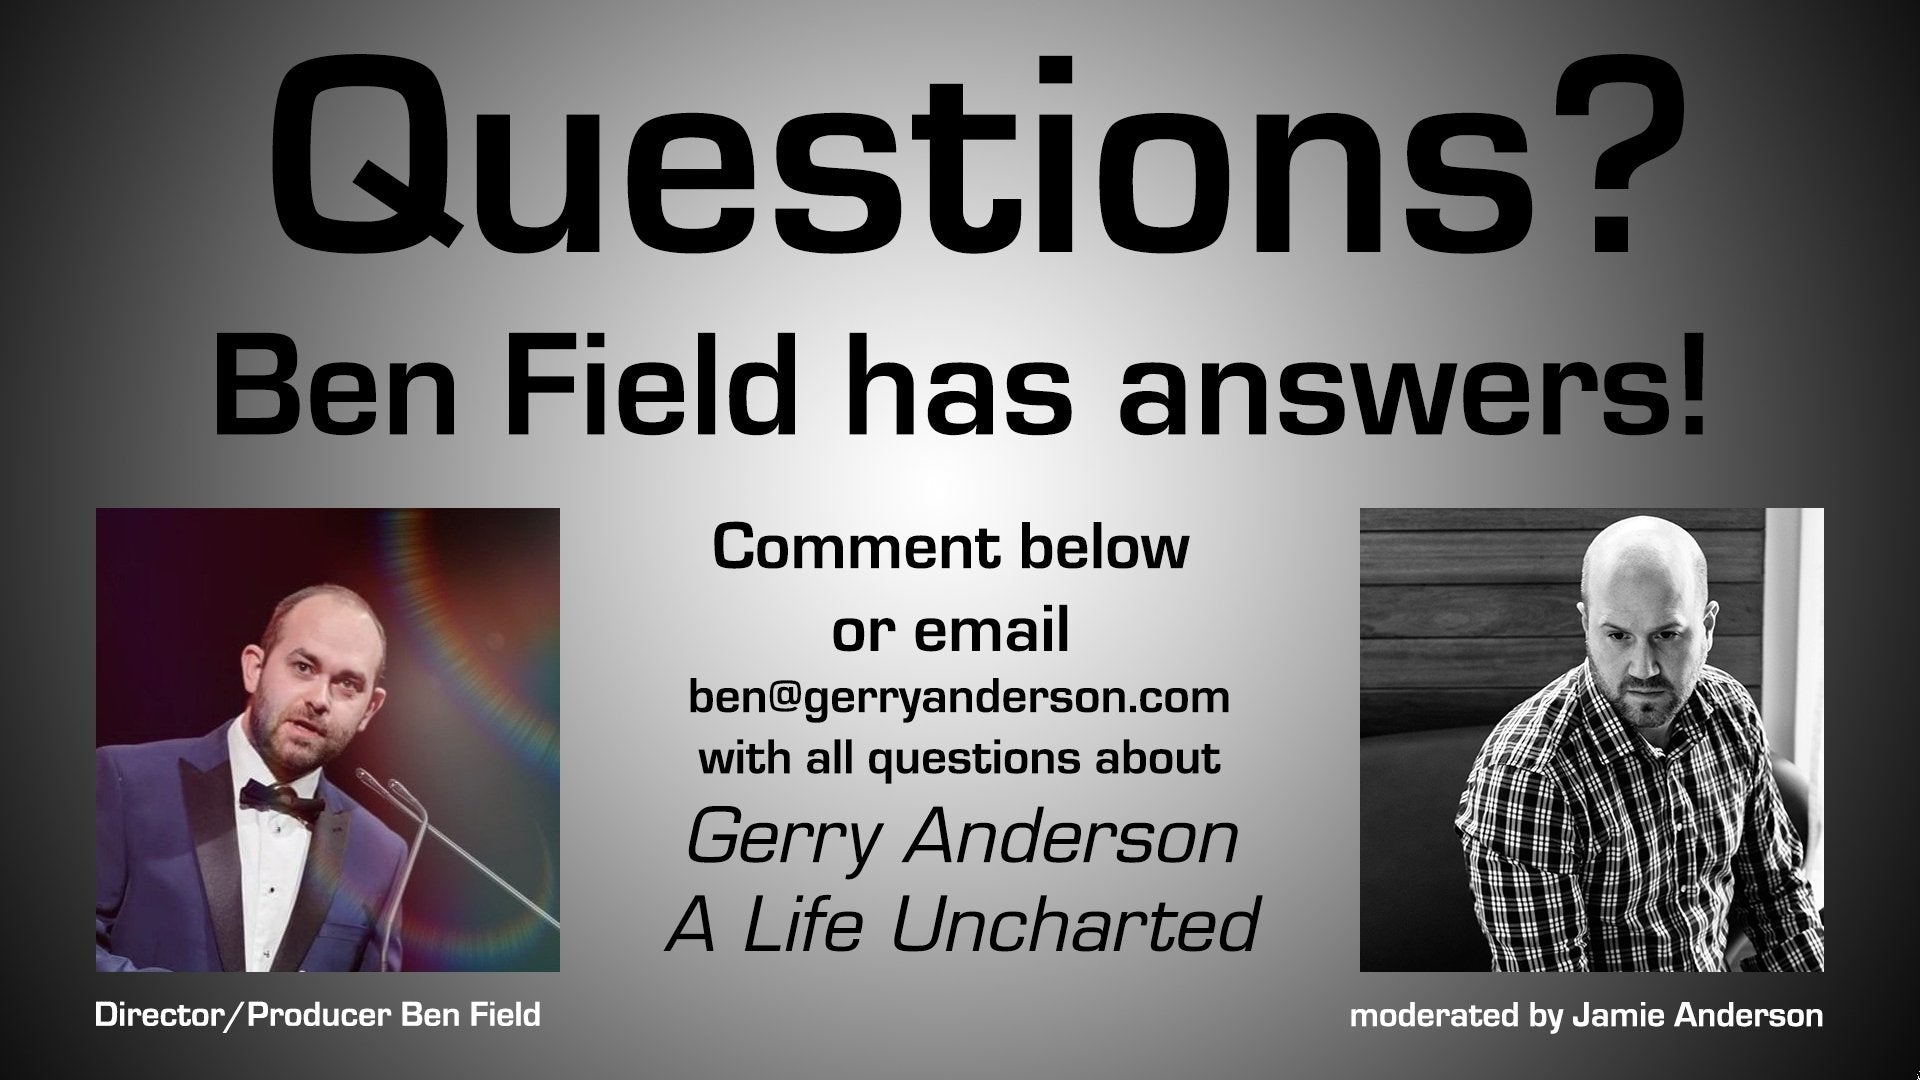 Ask YOUR Questions about the Documentary! - The Gerry Anderson Store